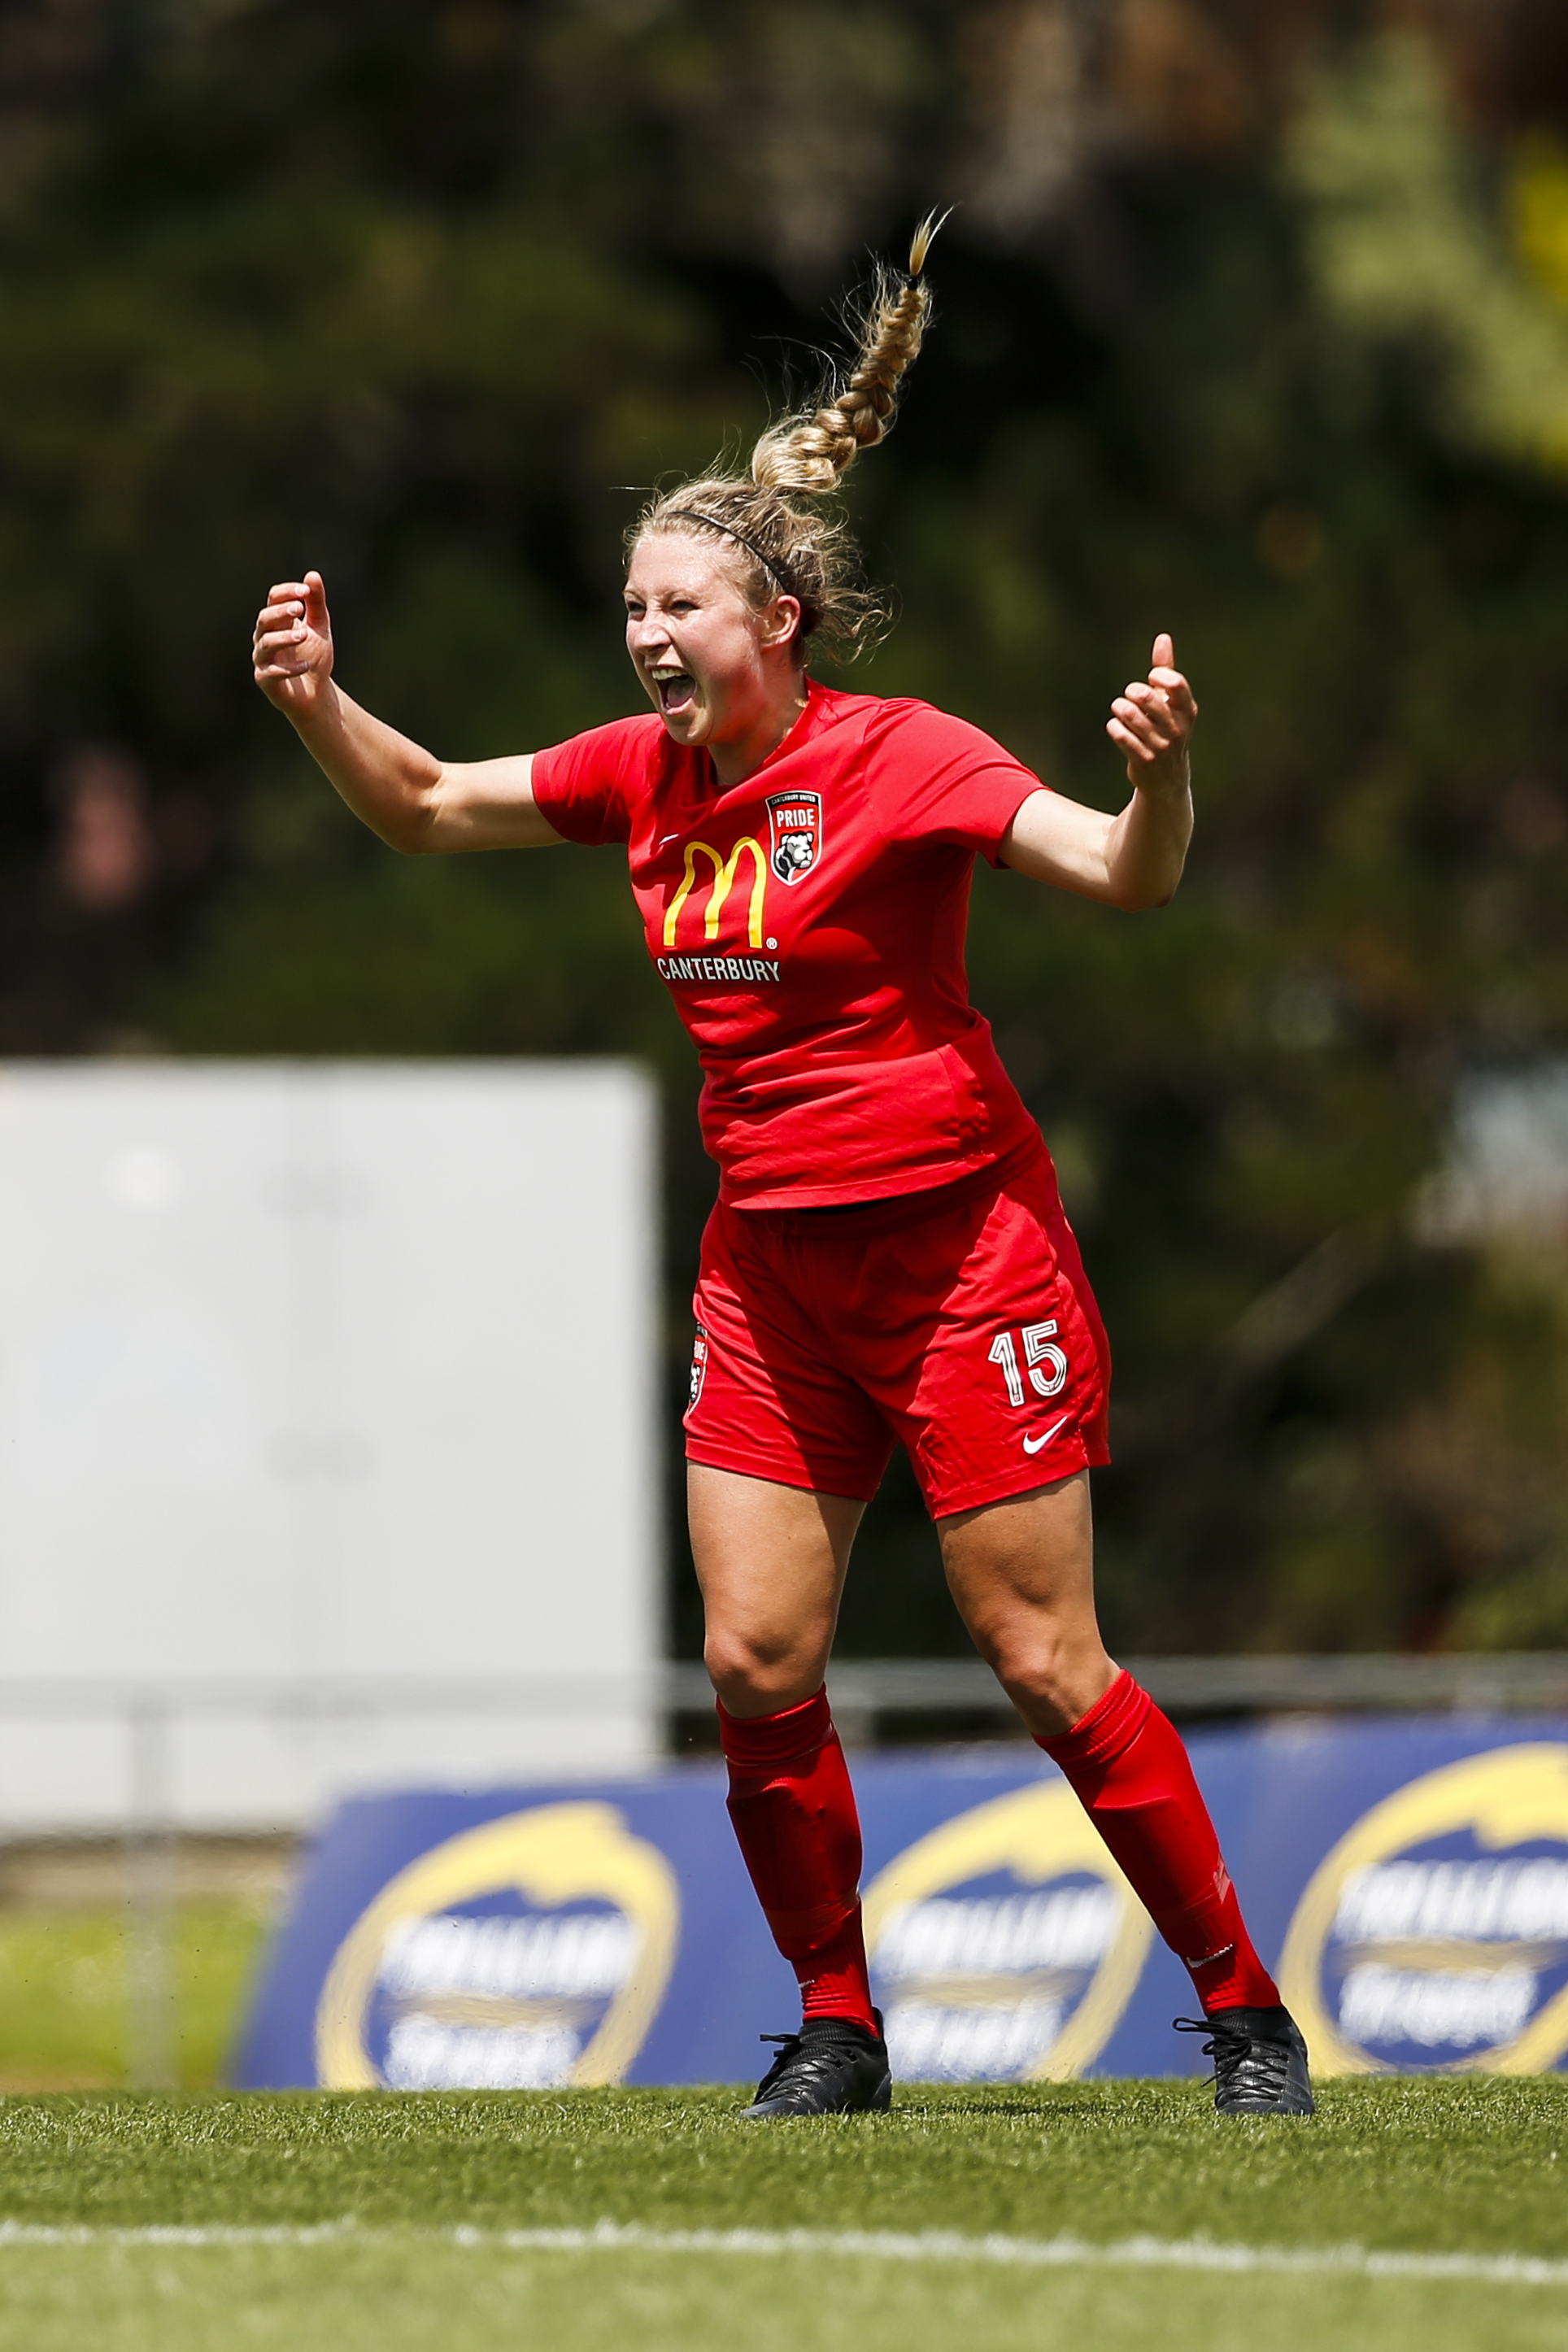  Monique Barker of Canterbury scores the winning goal against Northern at the National Women's League Final. 16 December 2018. Trusts Arena, Auckland, New Zealand. Copyright photo: Alisha Lovrich / www.photosport.nz 